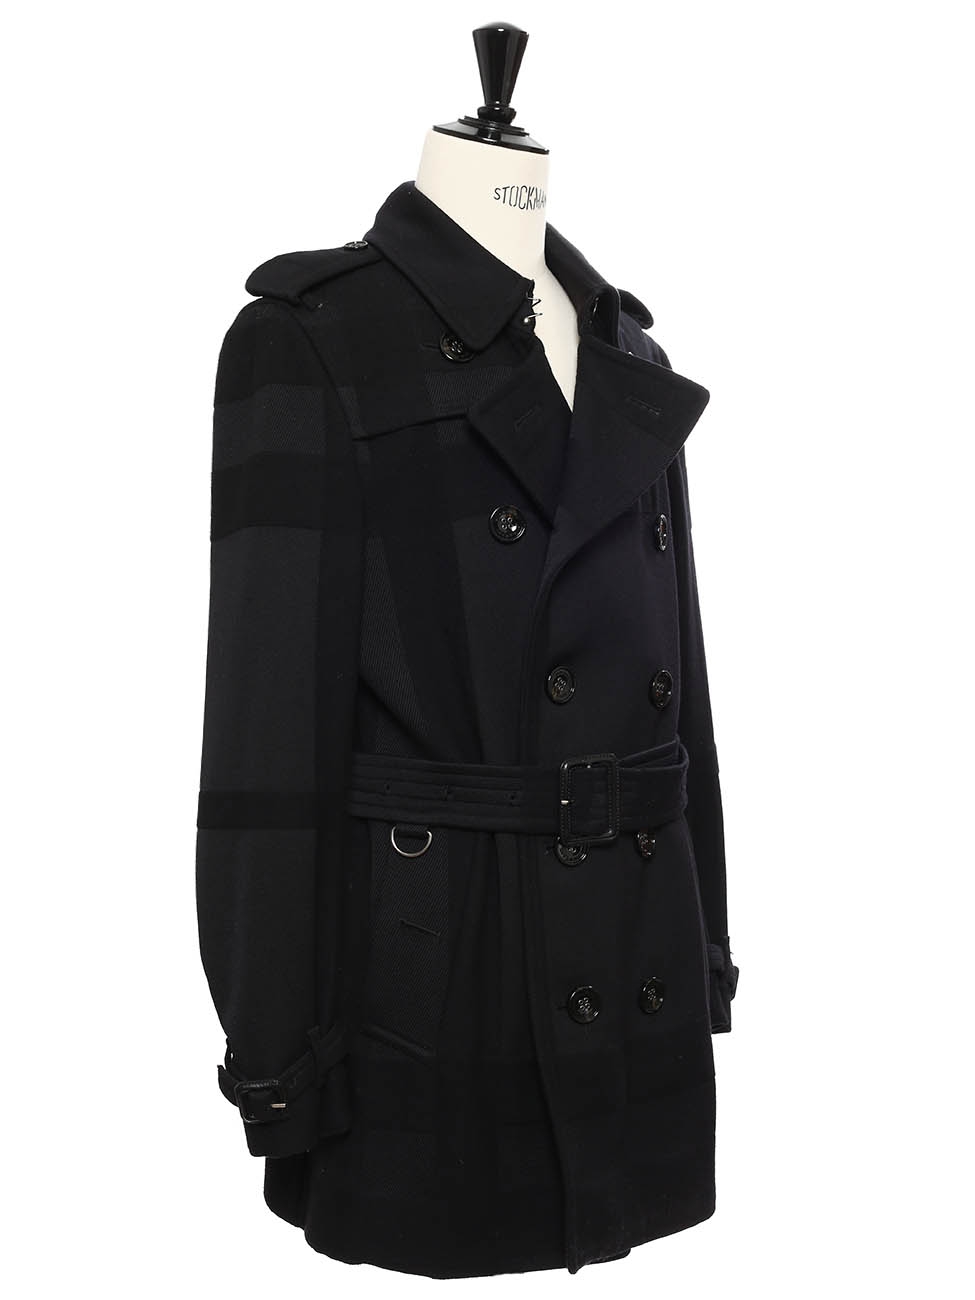 Louise Paris - BURBERRY LONDON Navy blue wool trench coat Retail price €1800 Size 48 / S